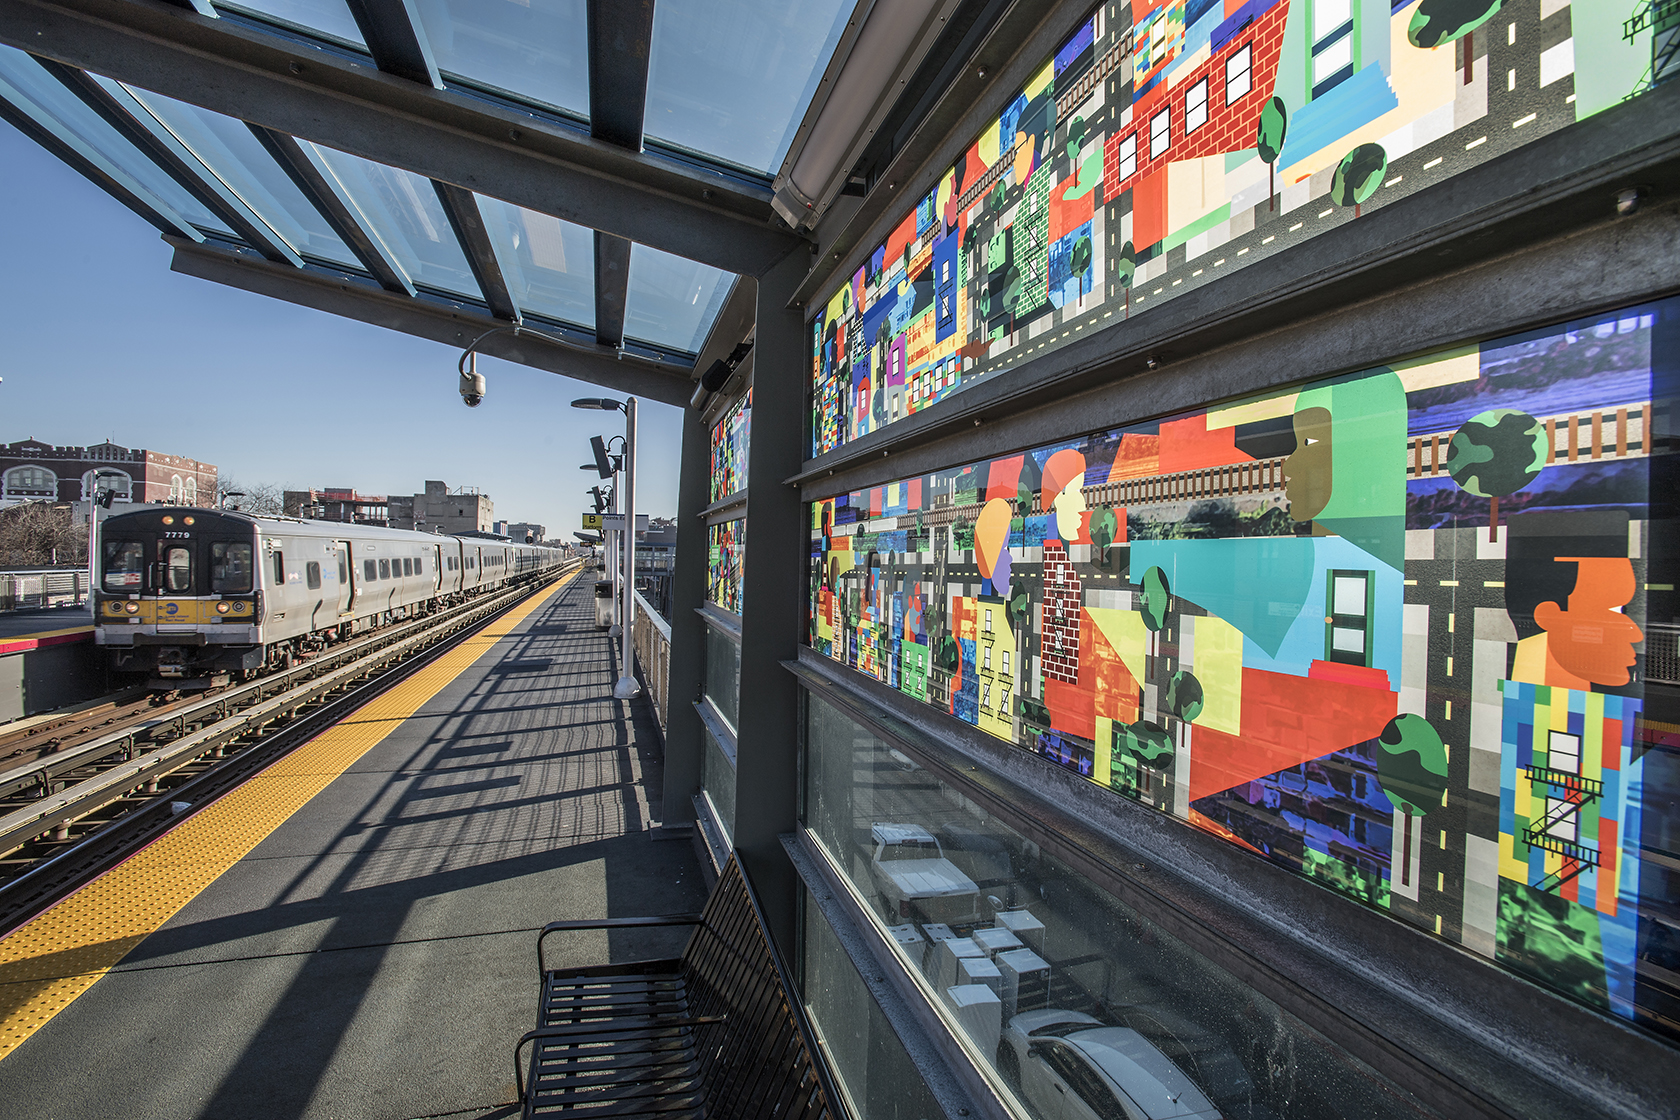 Derrick Adams, BFA Art and Design Education ’96, “Around the Way” (2019) at the LIRR Nostrand Avenue Station in Brooklyn (photo by the Metropolitan Transportation Authority/Flickr)